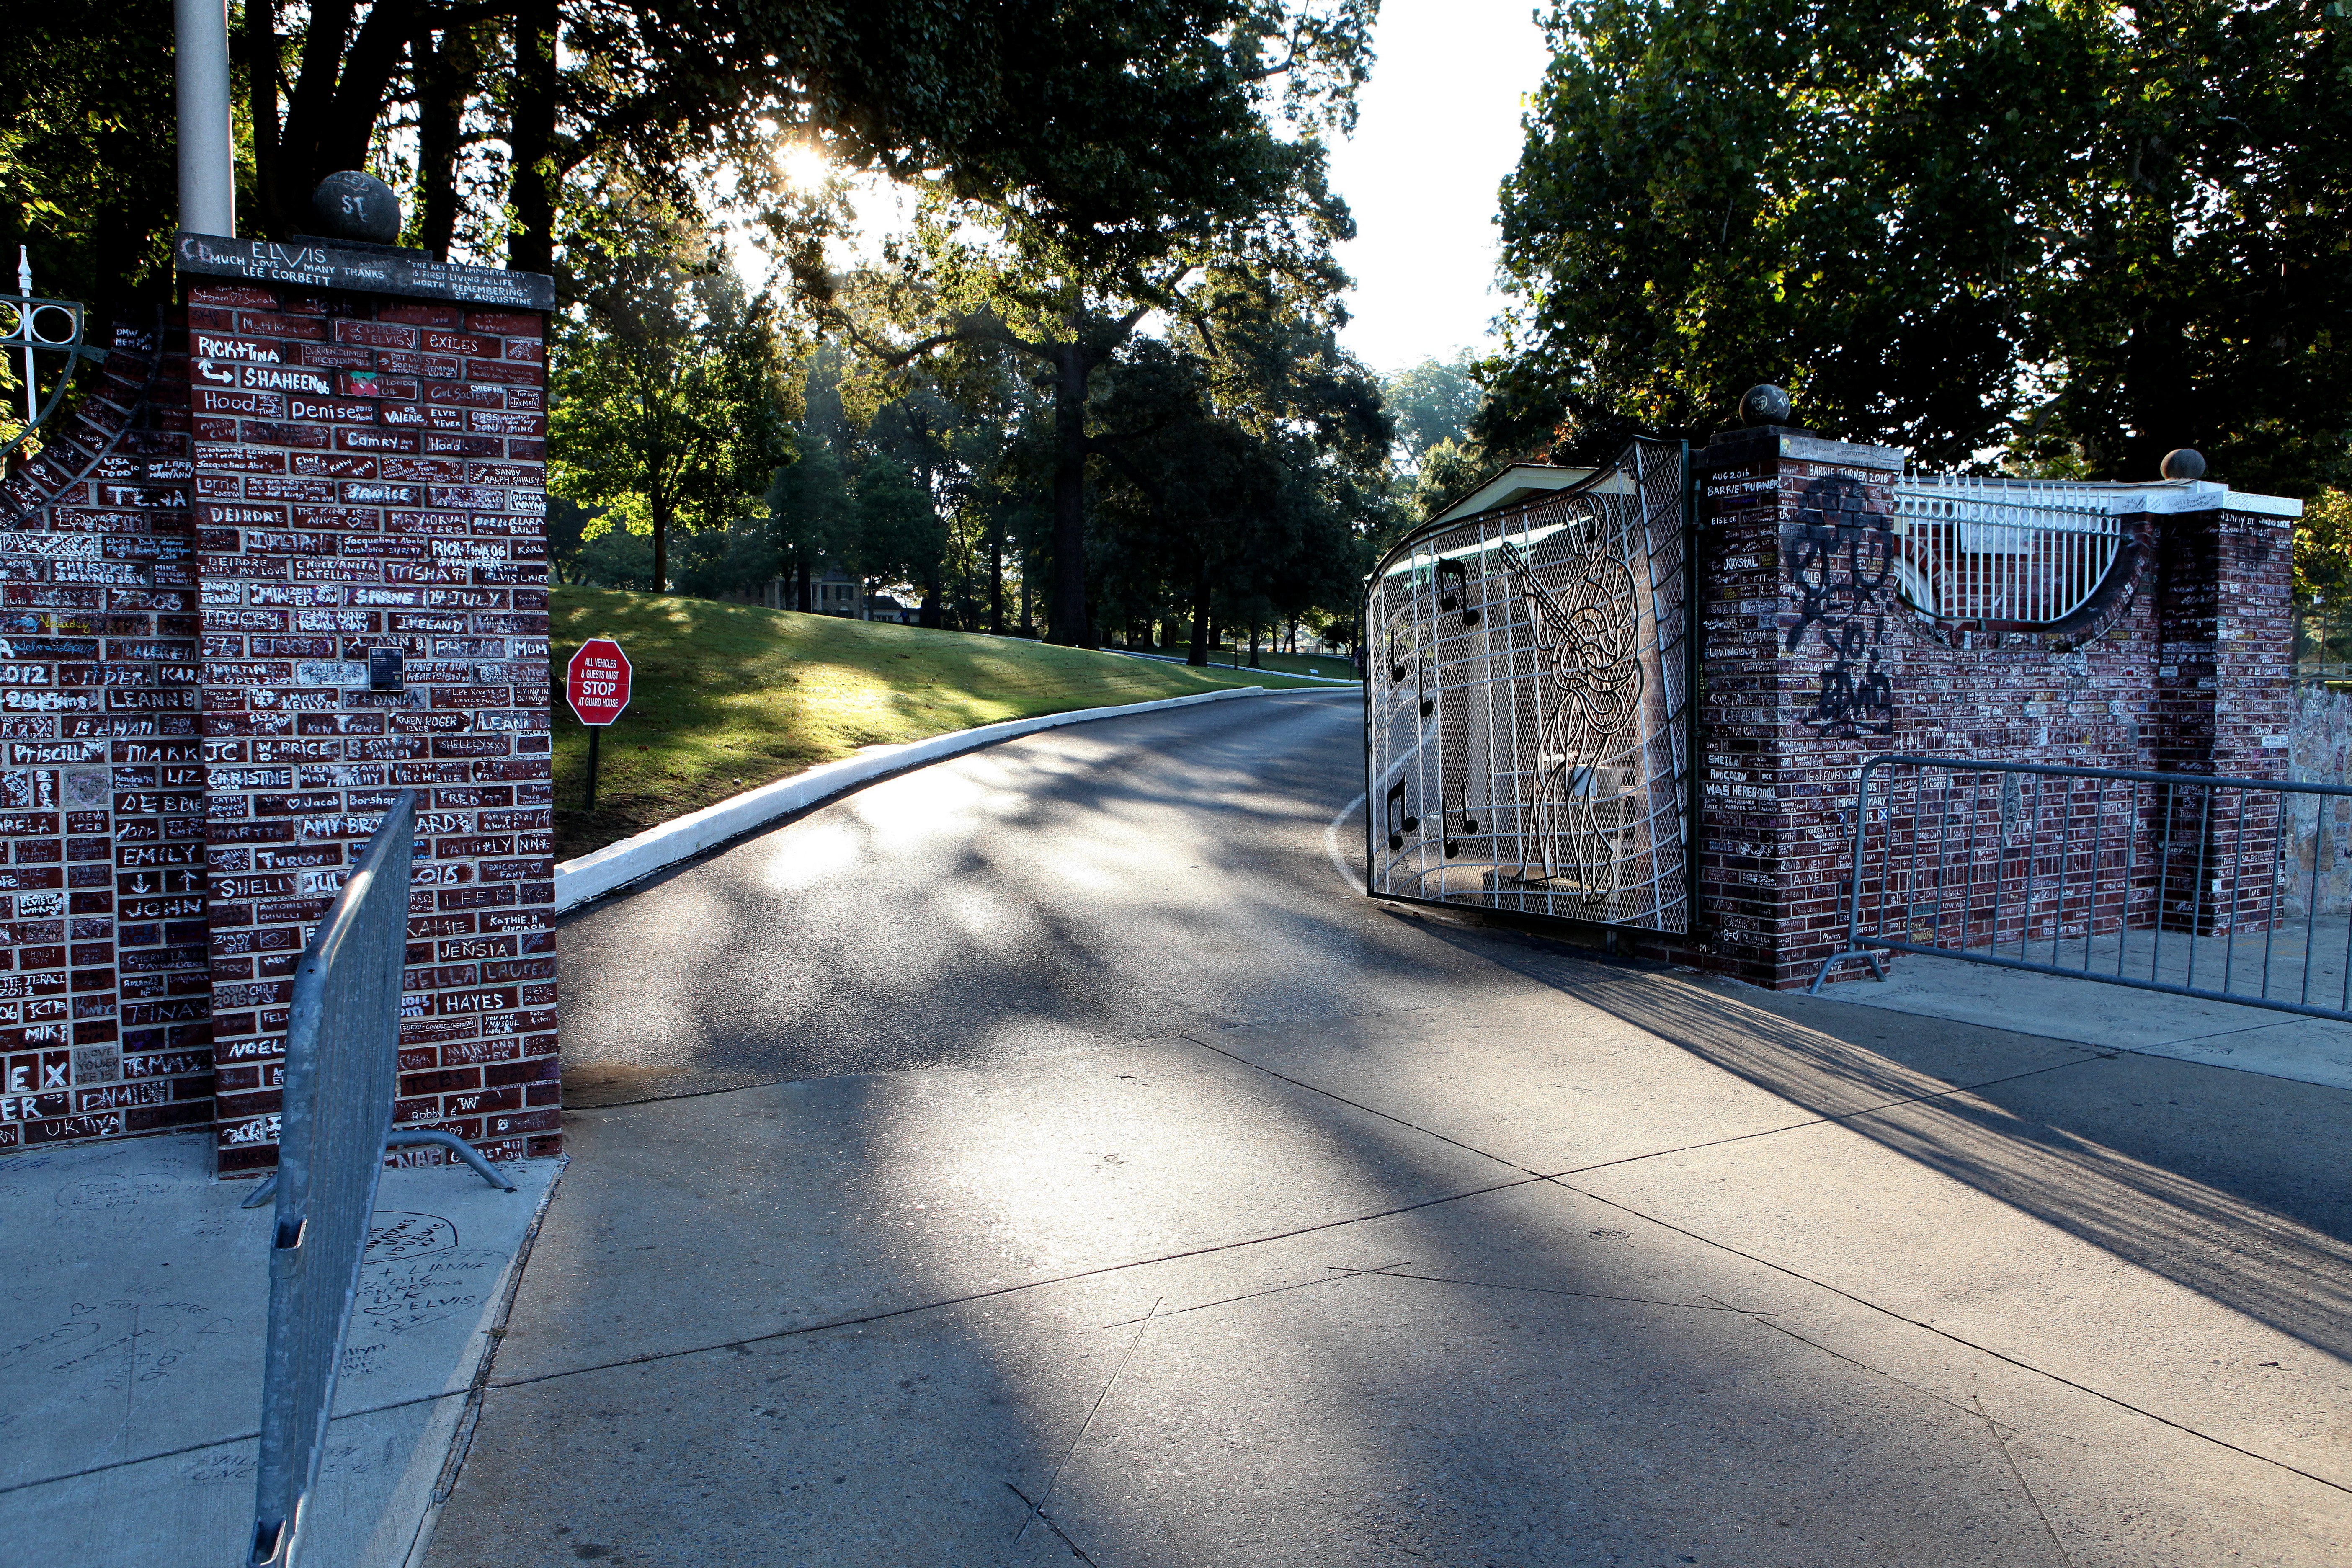 The entryway to Graceland, the residence of the deceased Elvis Presley in Memphis, Tennessee, on October 3, 2016 | Source: Getty Images